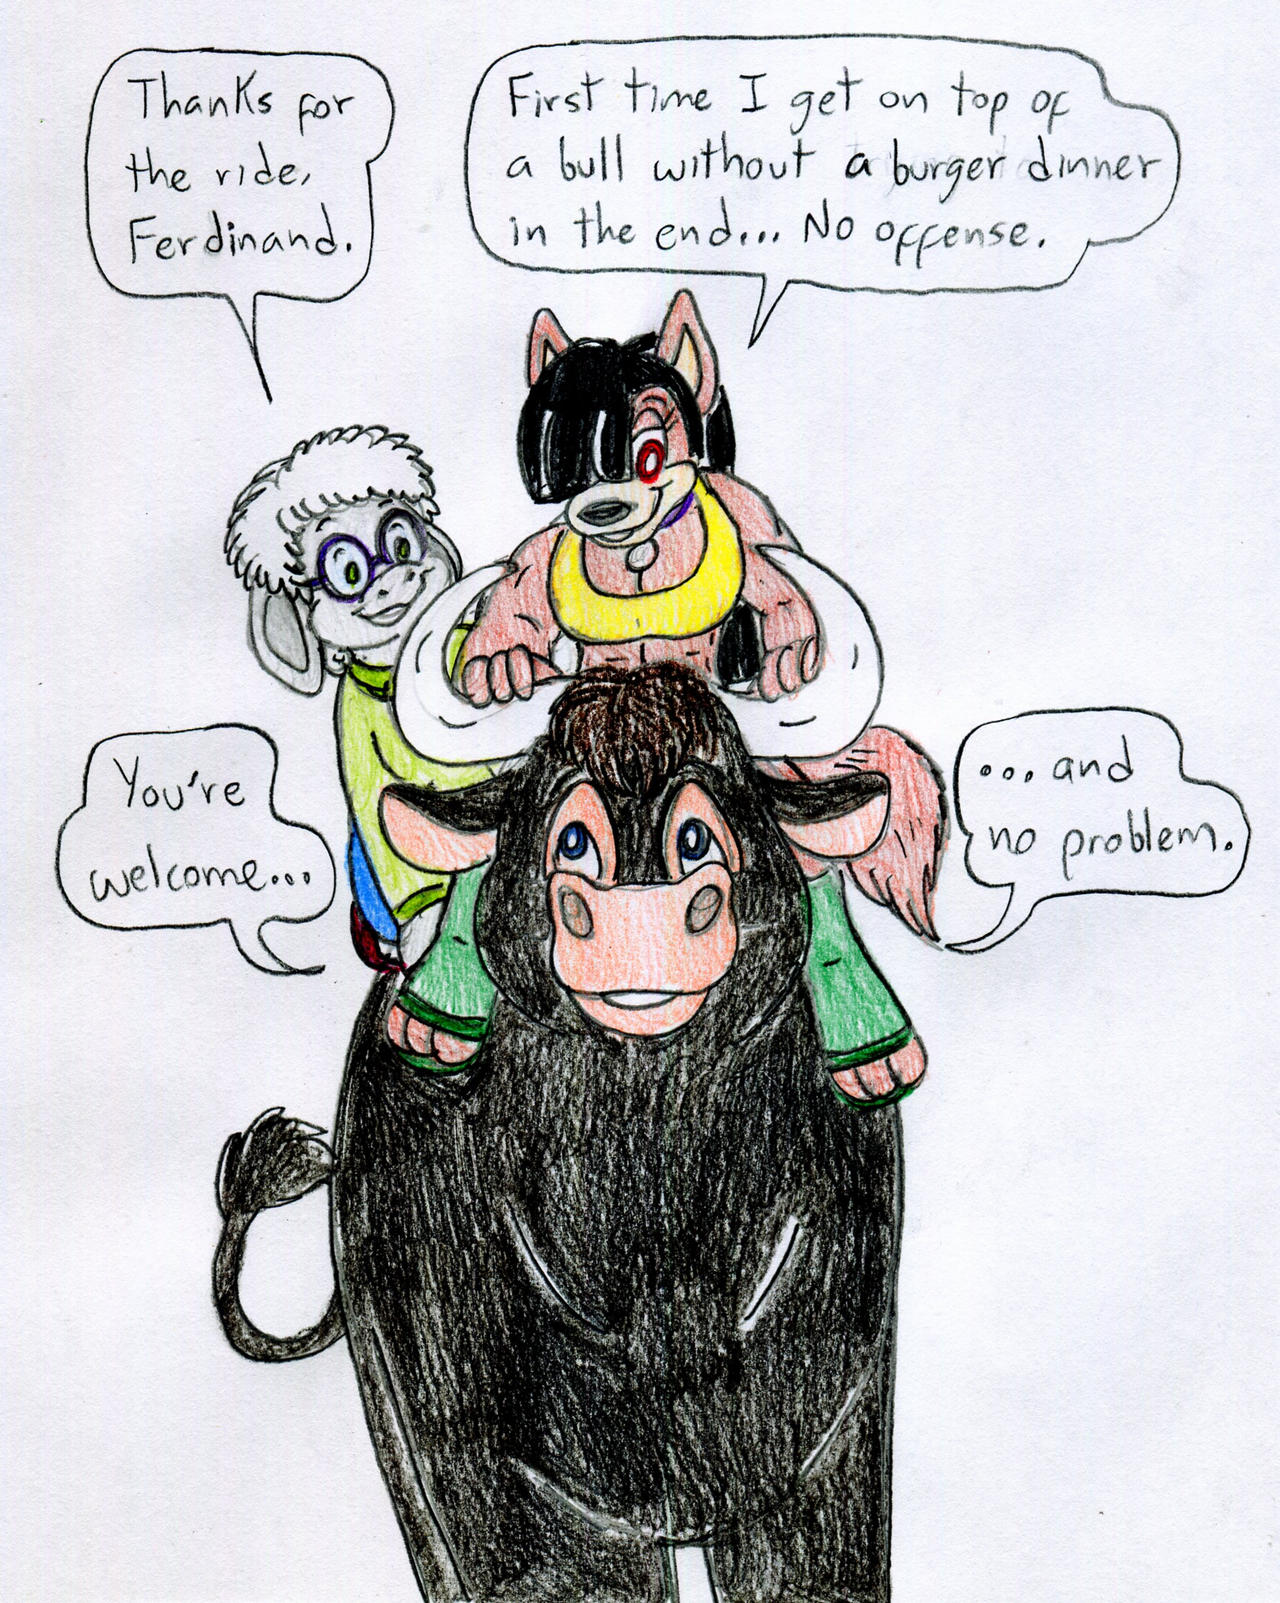 Nina and her owner, Ferdinand the Bull by matiriani28 on DeviantArt